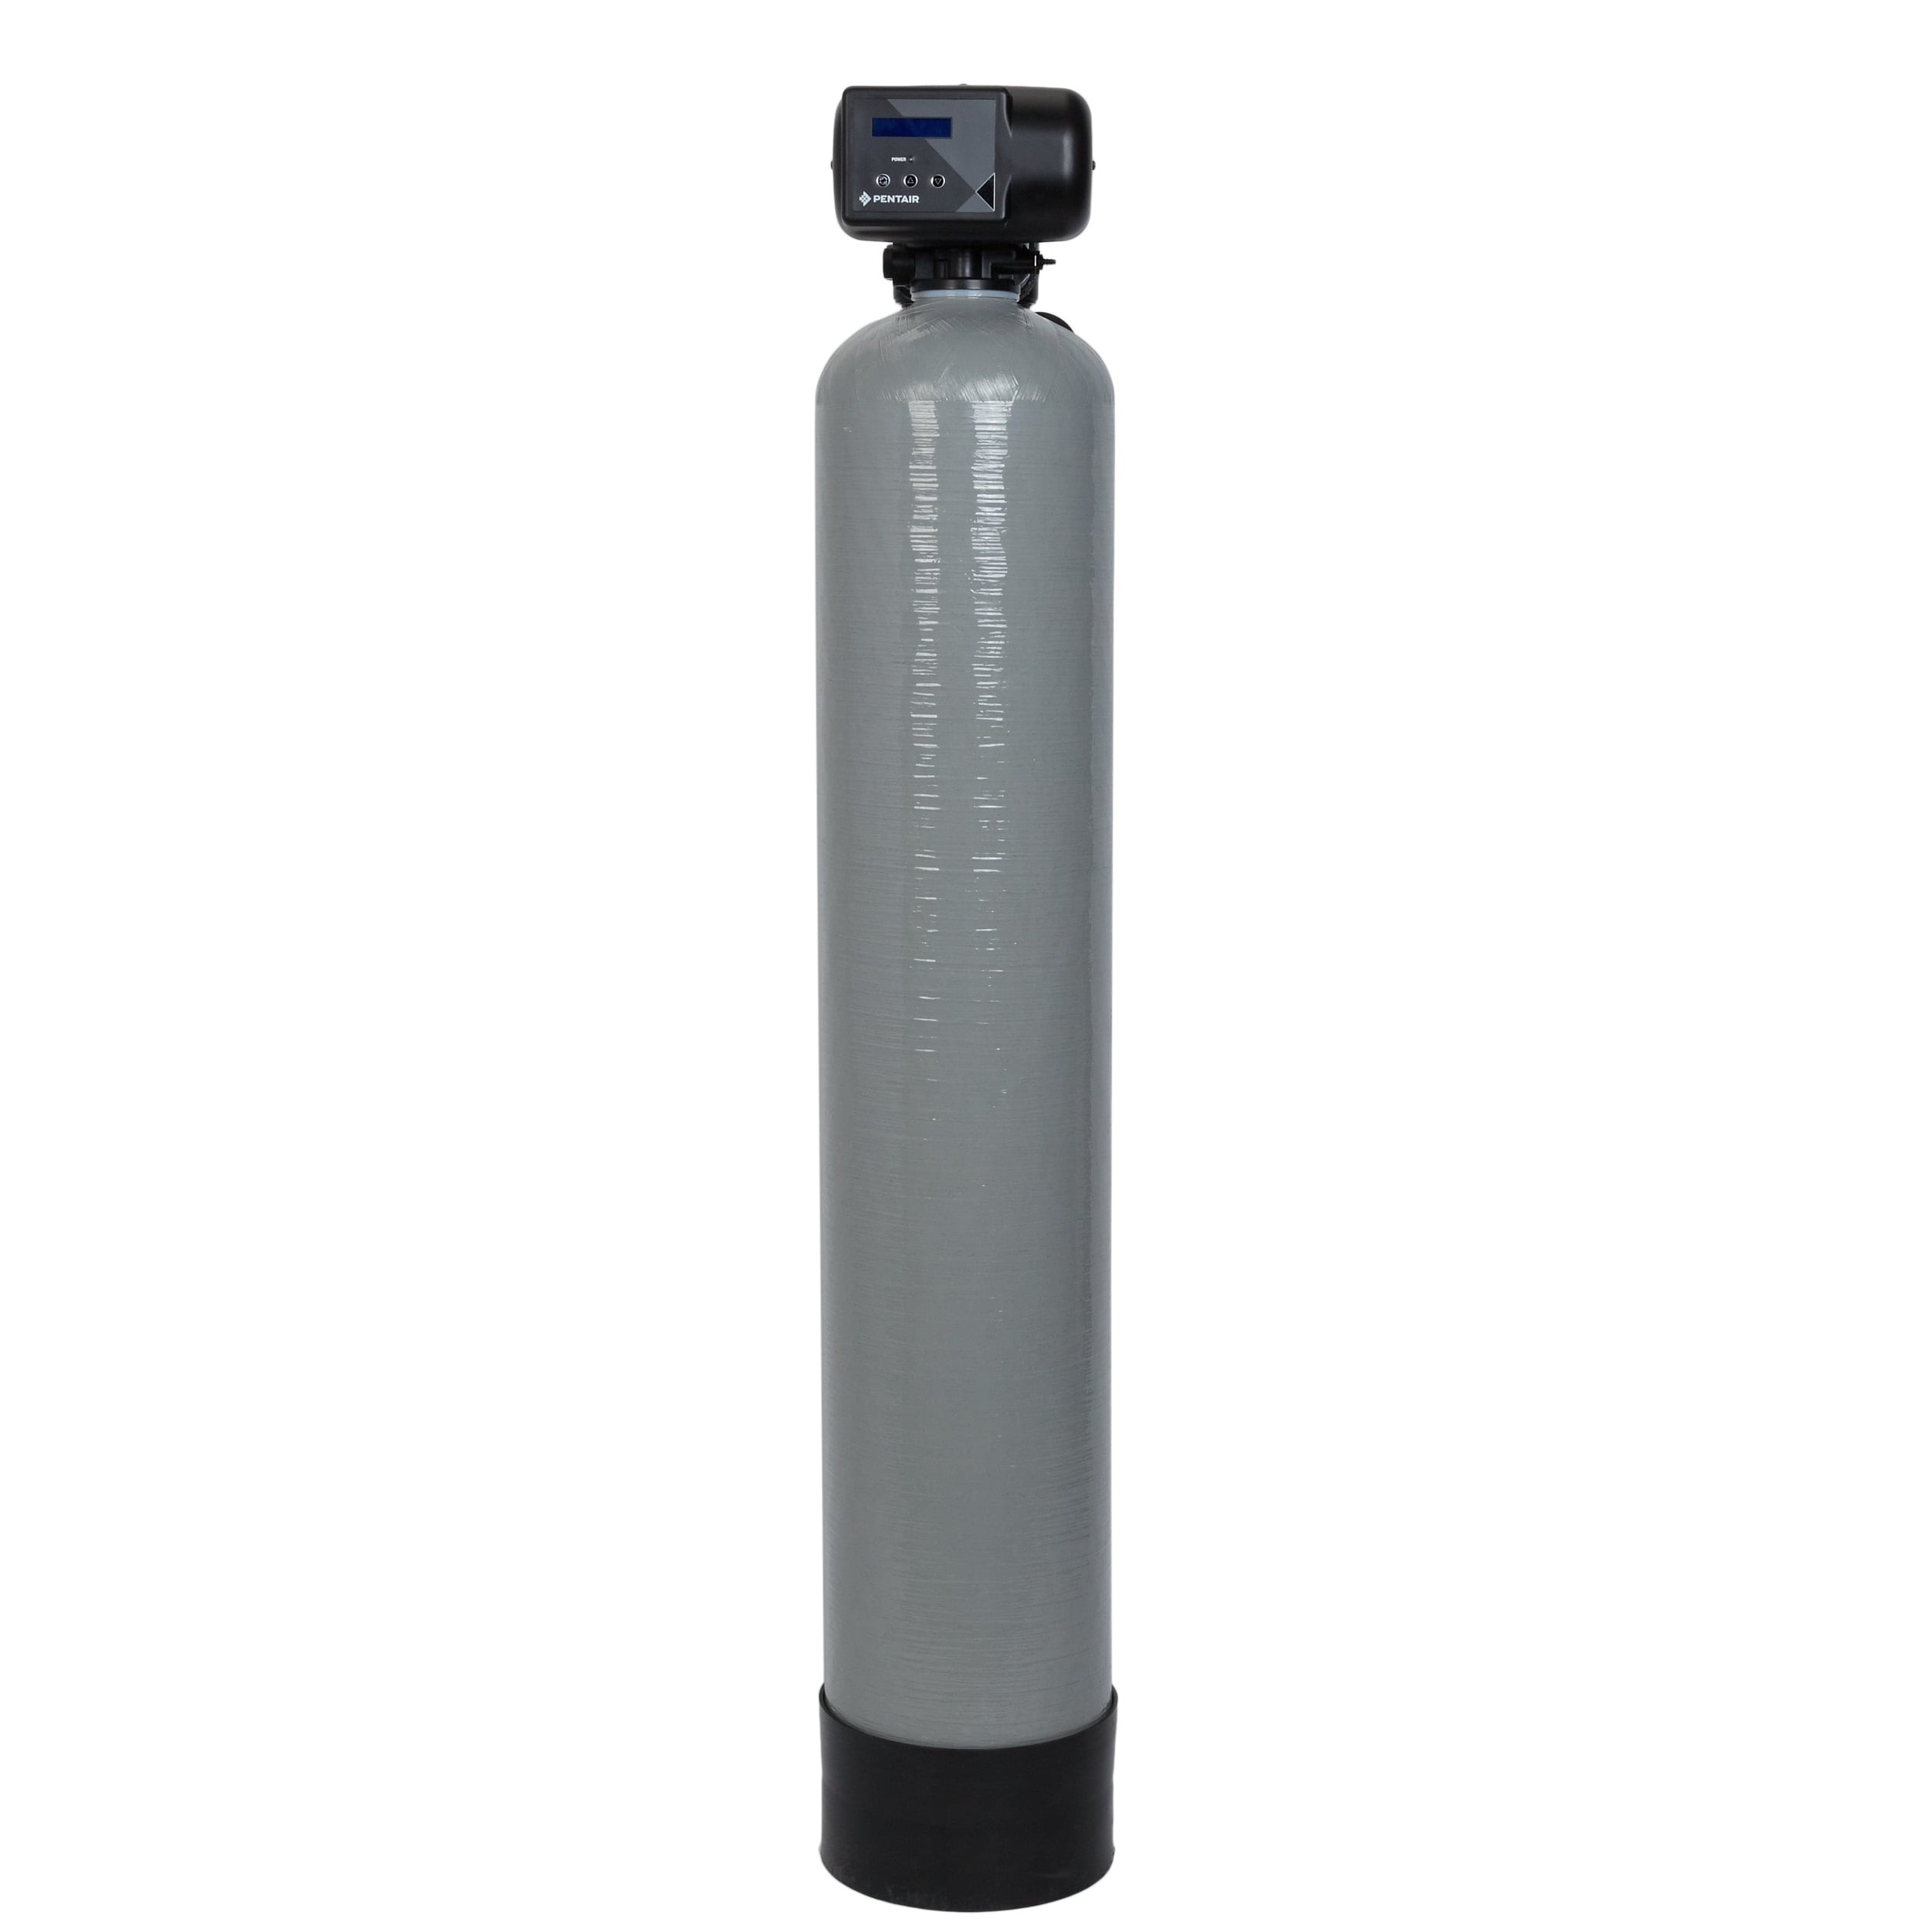 Pentair Whole House Filtration Systems at Lowes.com